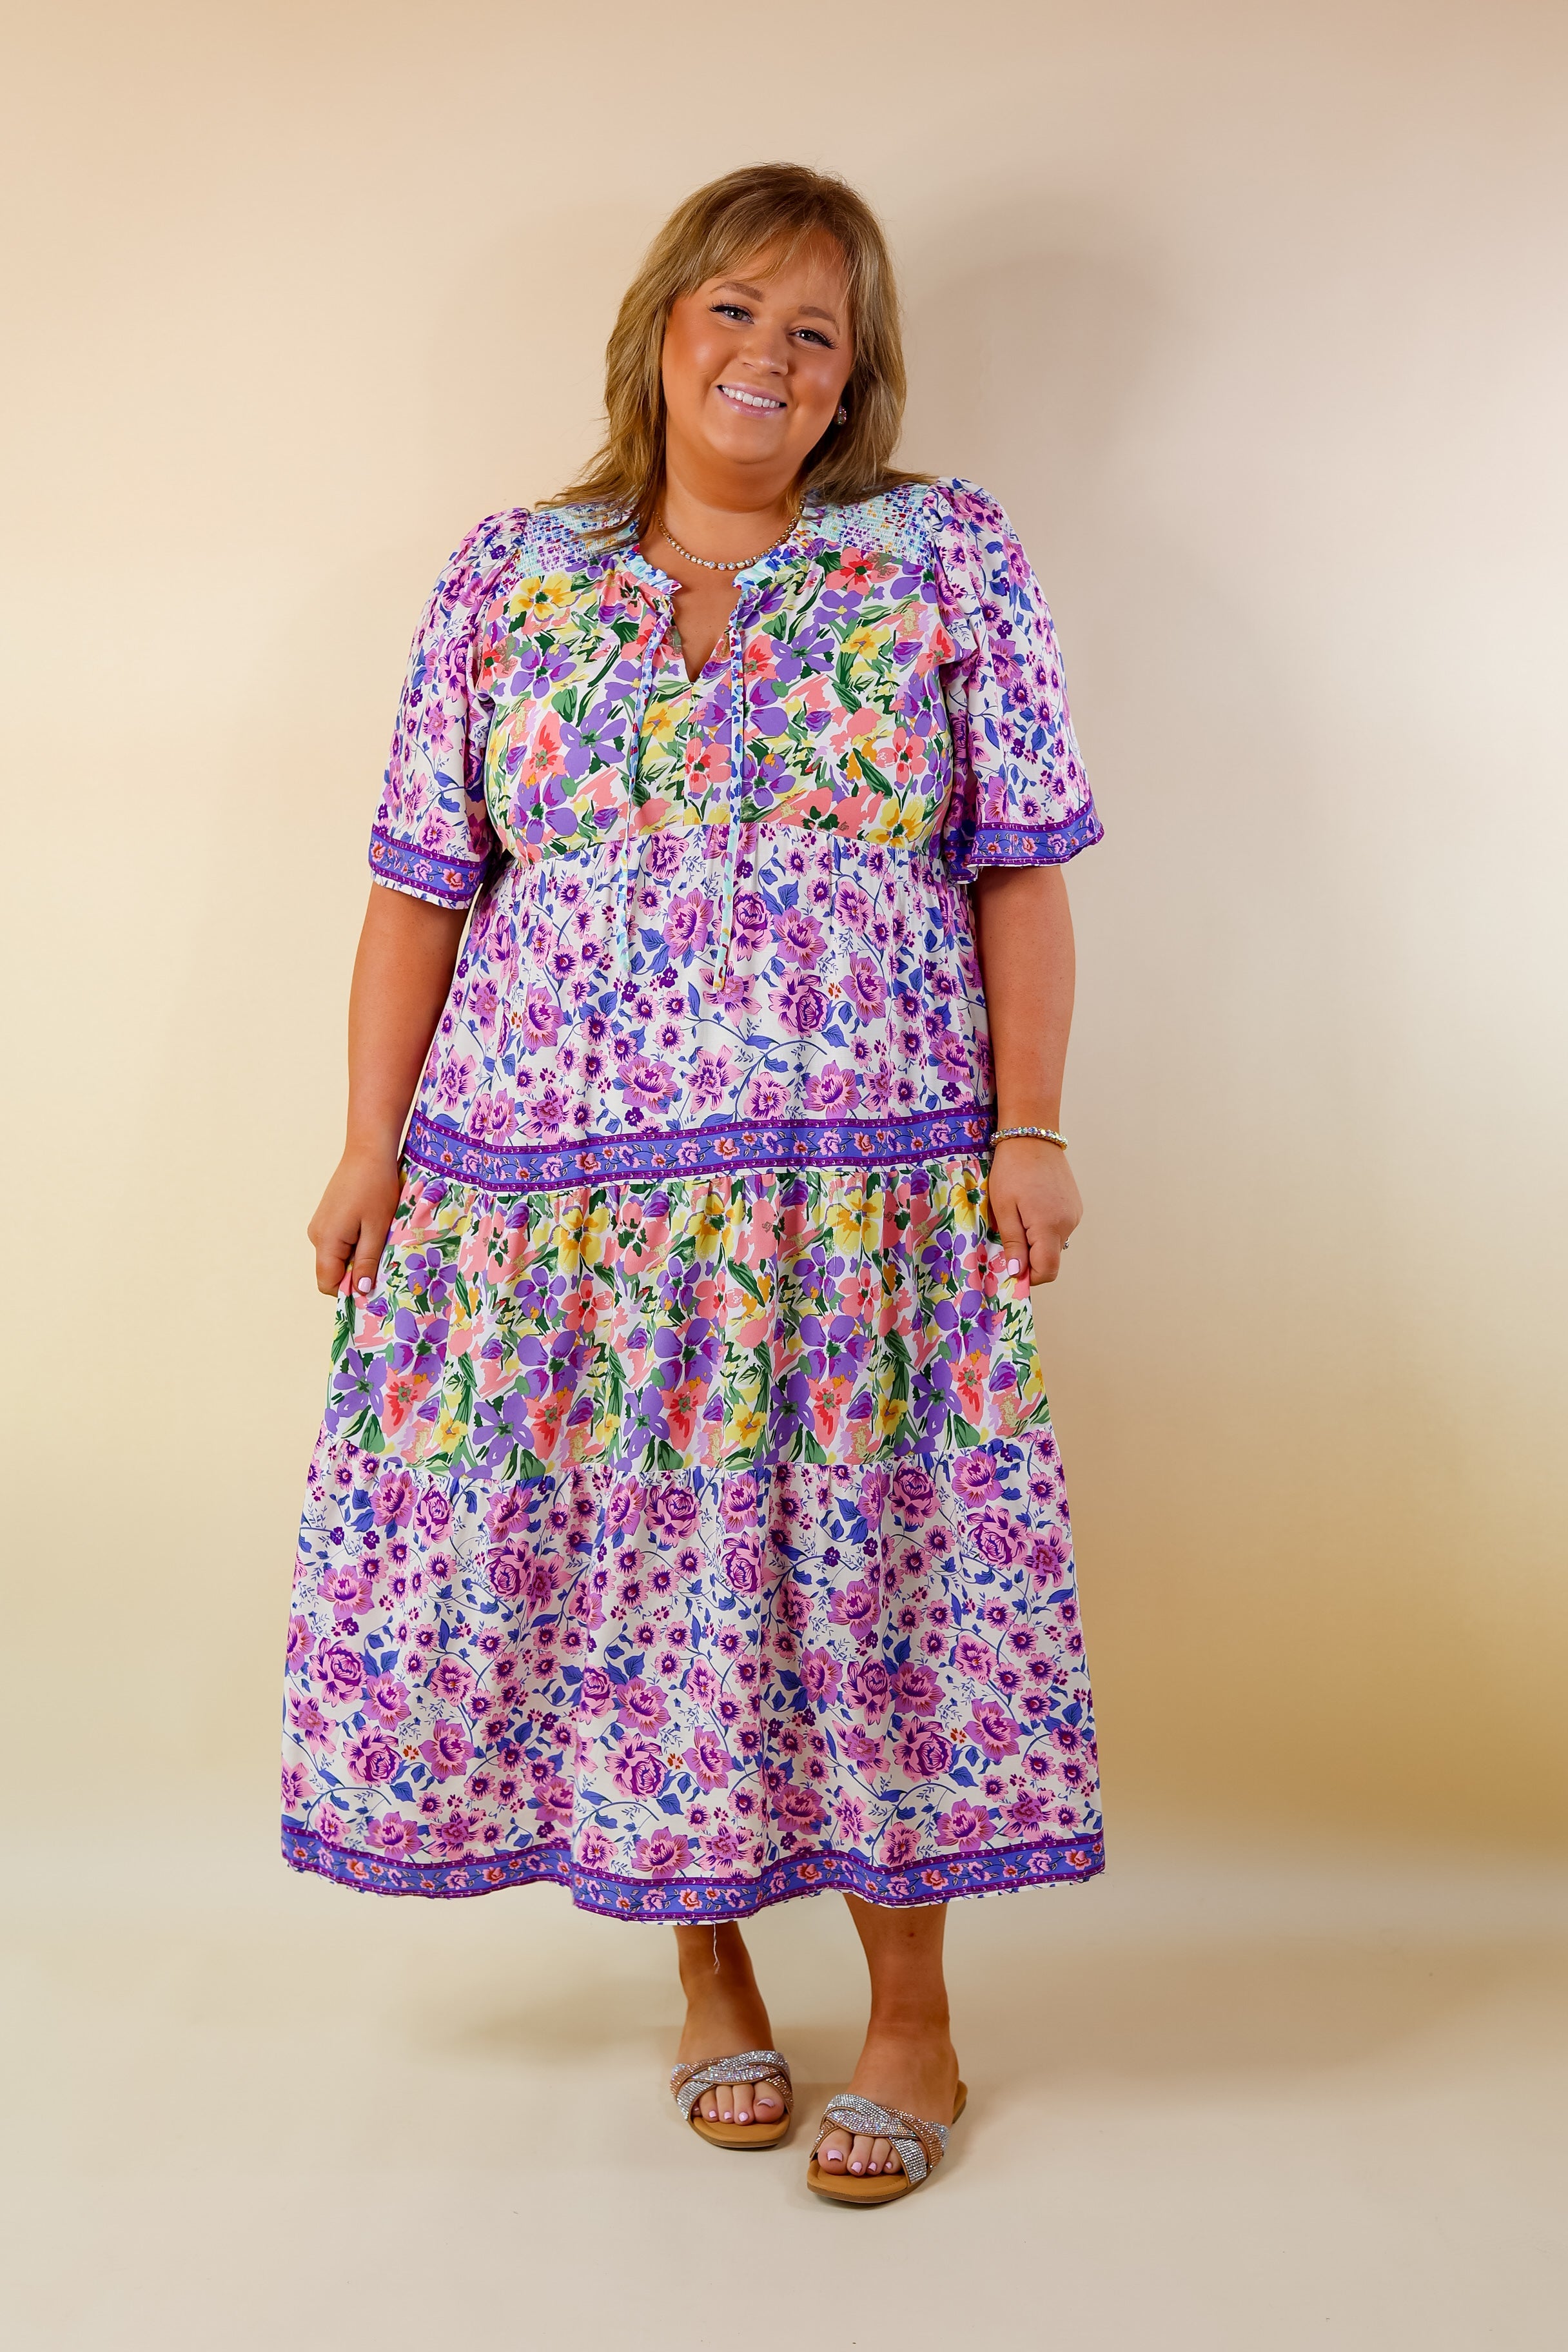 Tulip Fields Floral Tiered Midi Dress in Violet Purple Mix - Giddy Up Glamour Boutique